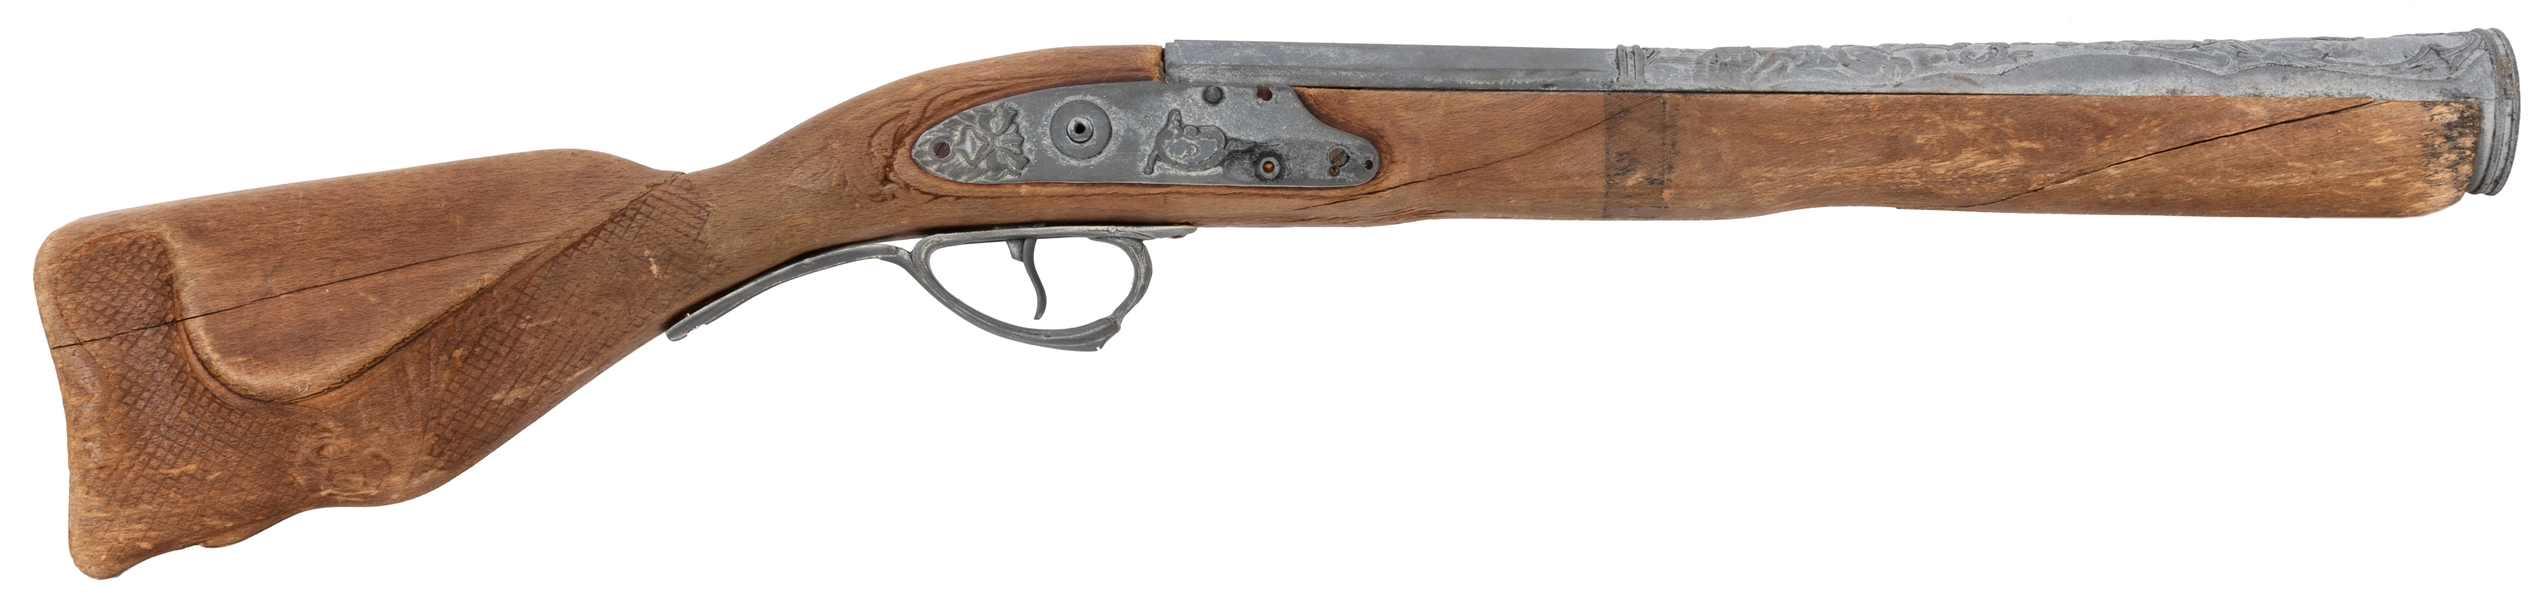 Wood and metal blunderbuss from the armory scene in Pirates of the Caribbean